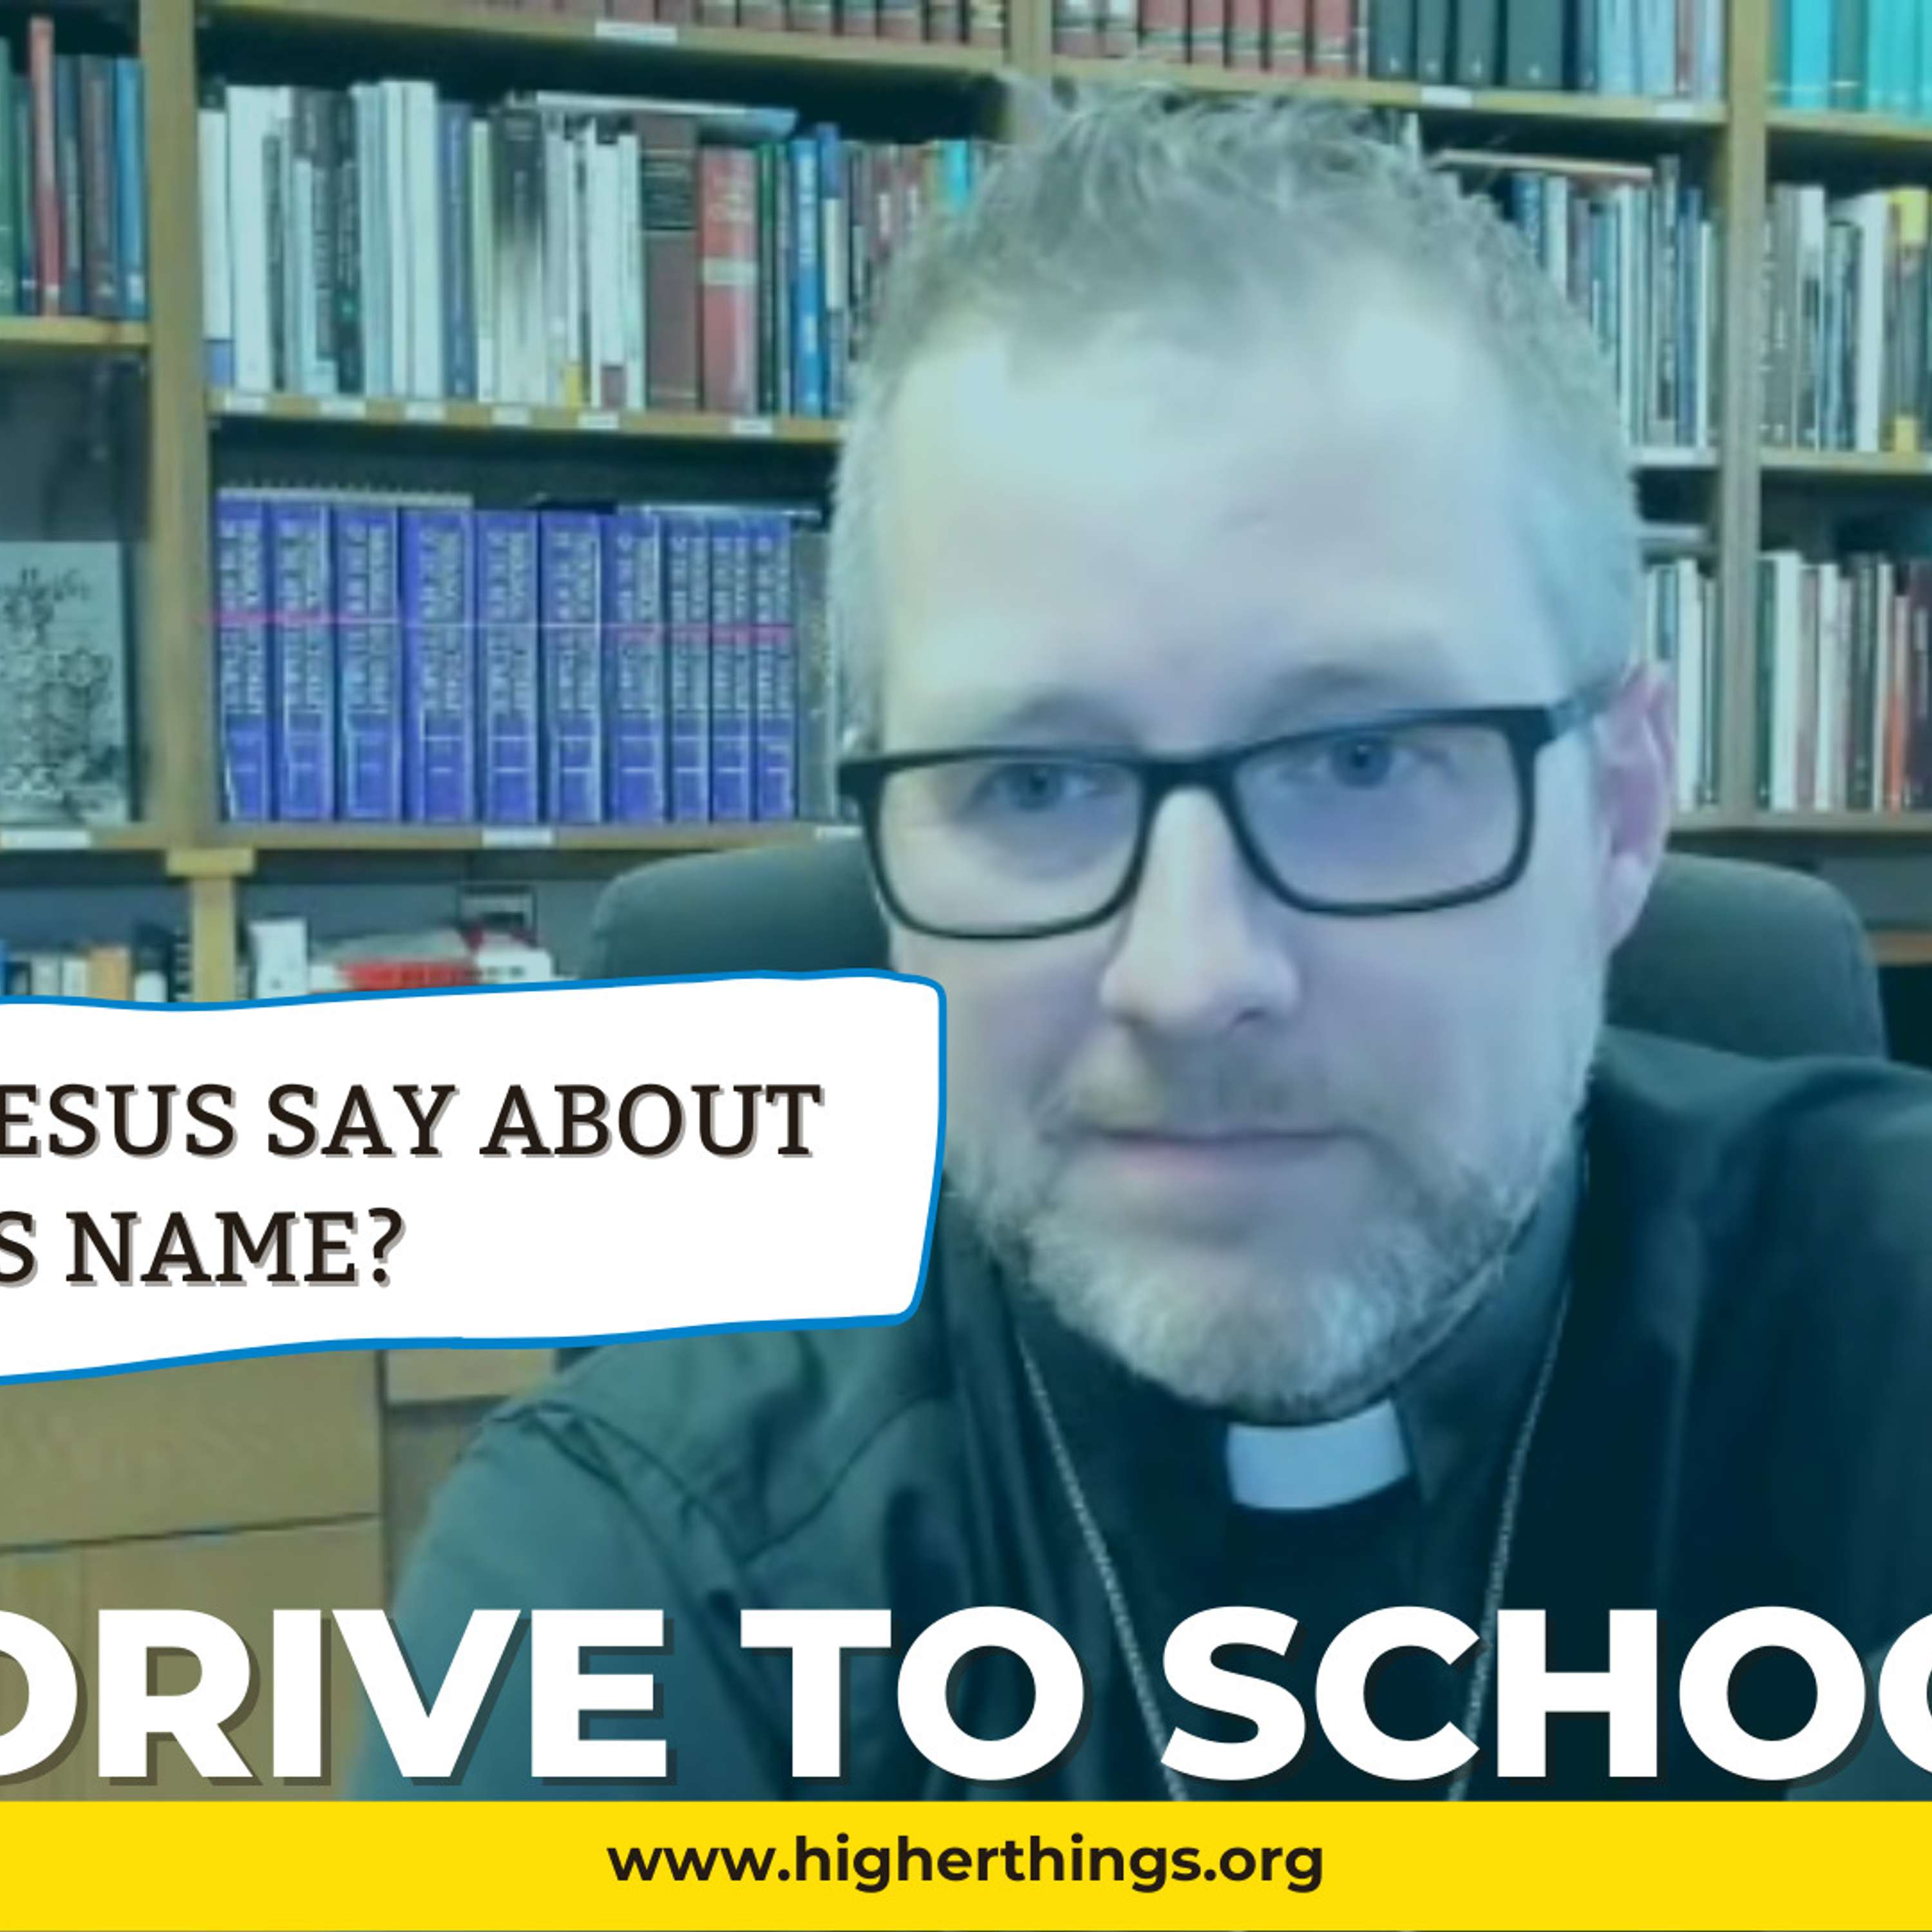 What does Jesus say about prayer in His name?